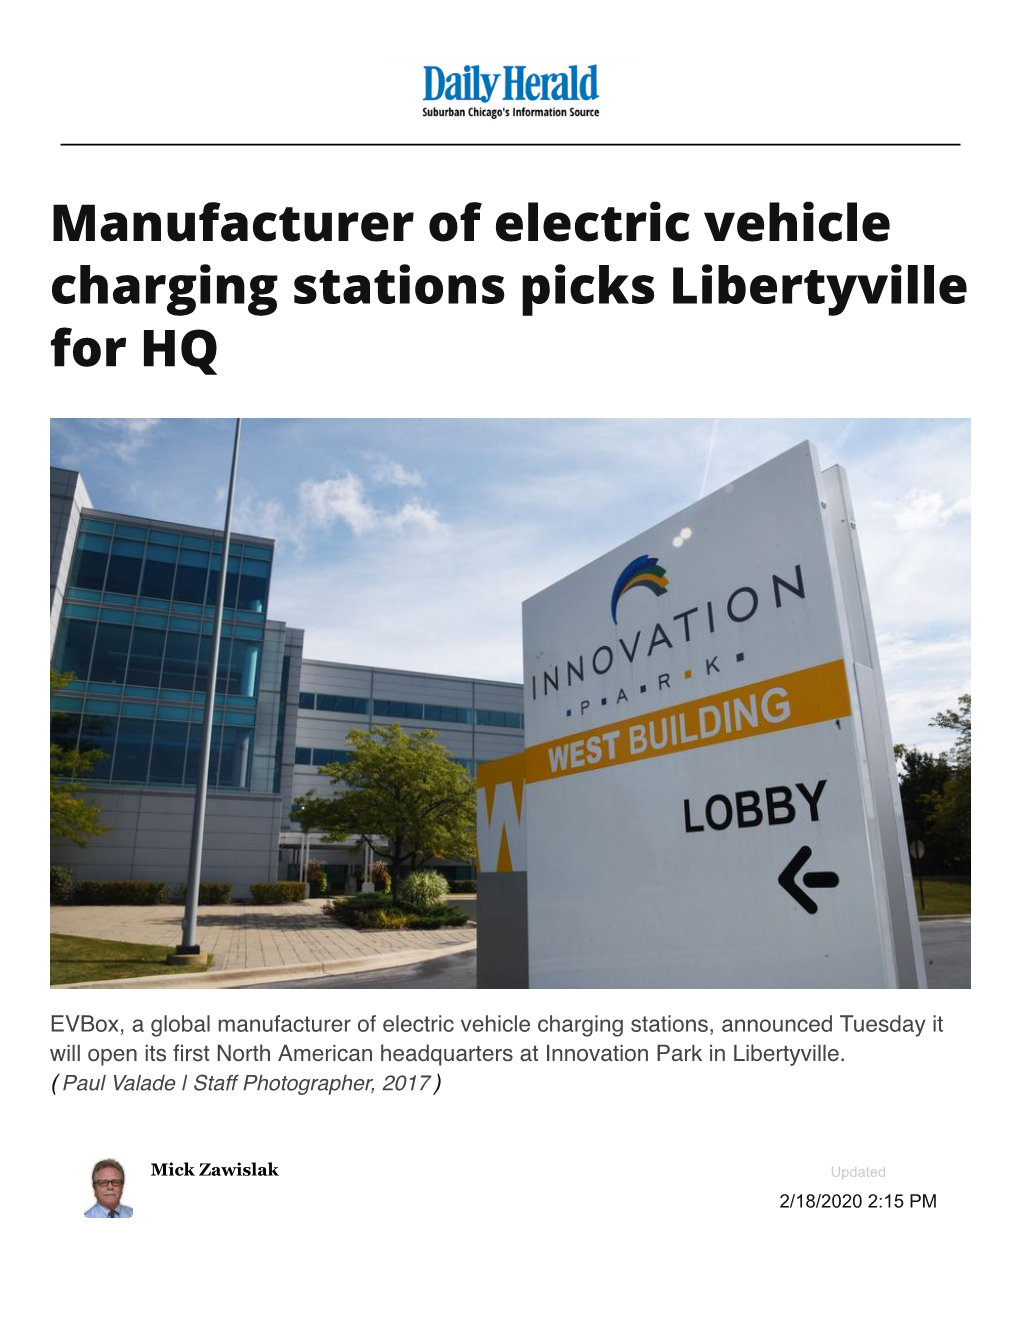 Manufacturer of Electric Vehicle Charging Stations Picks Libertyville for HQ